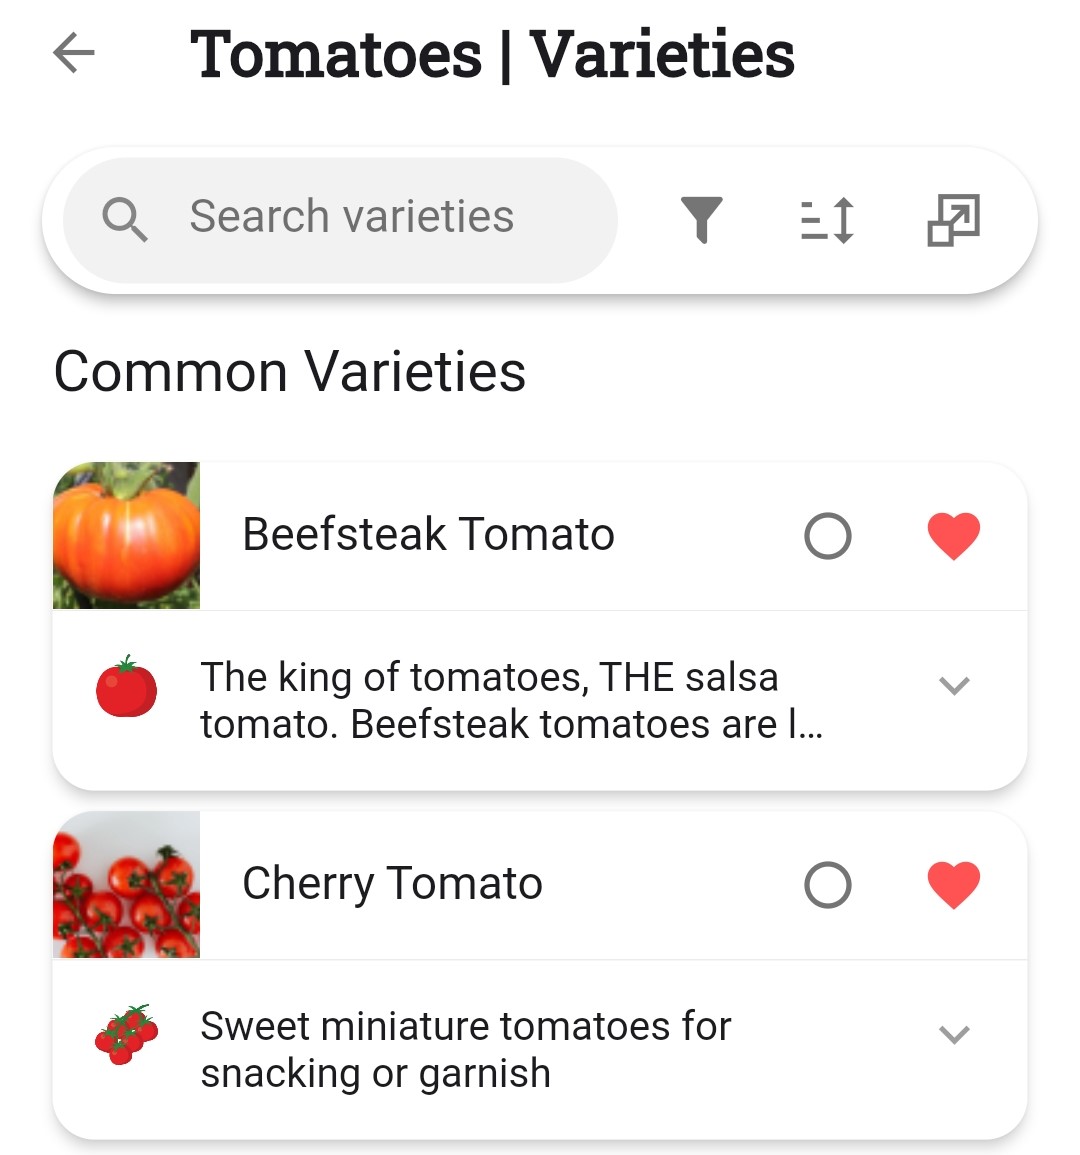 Screenshot of the heart icon and the default icon for varieties